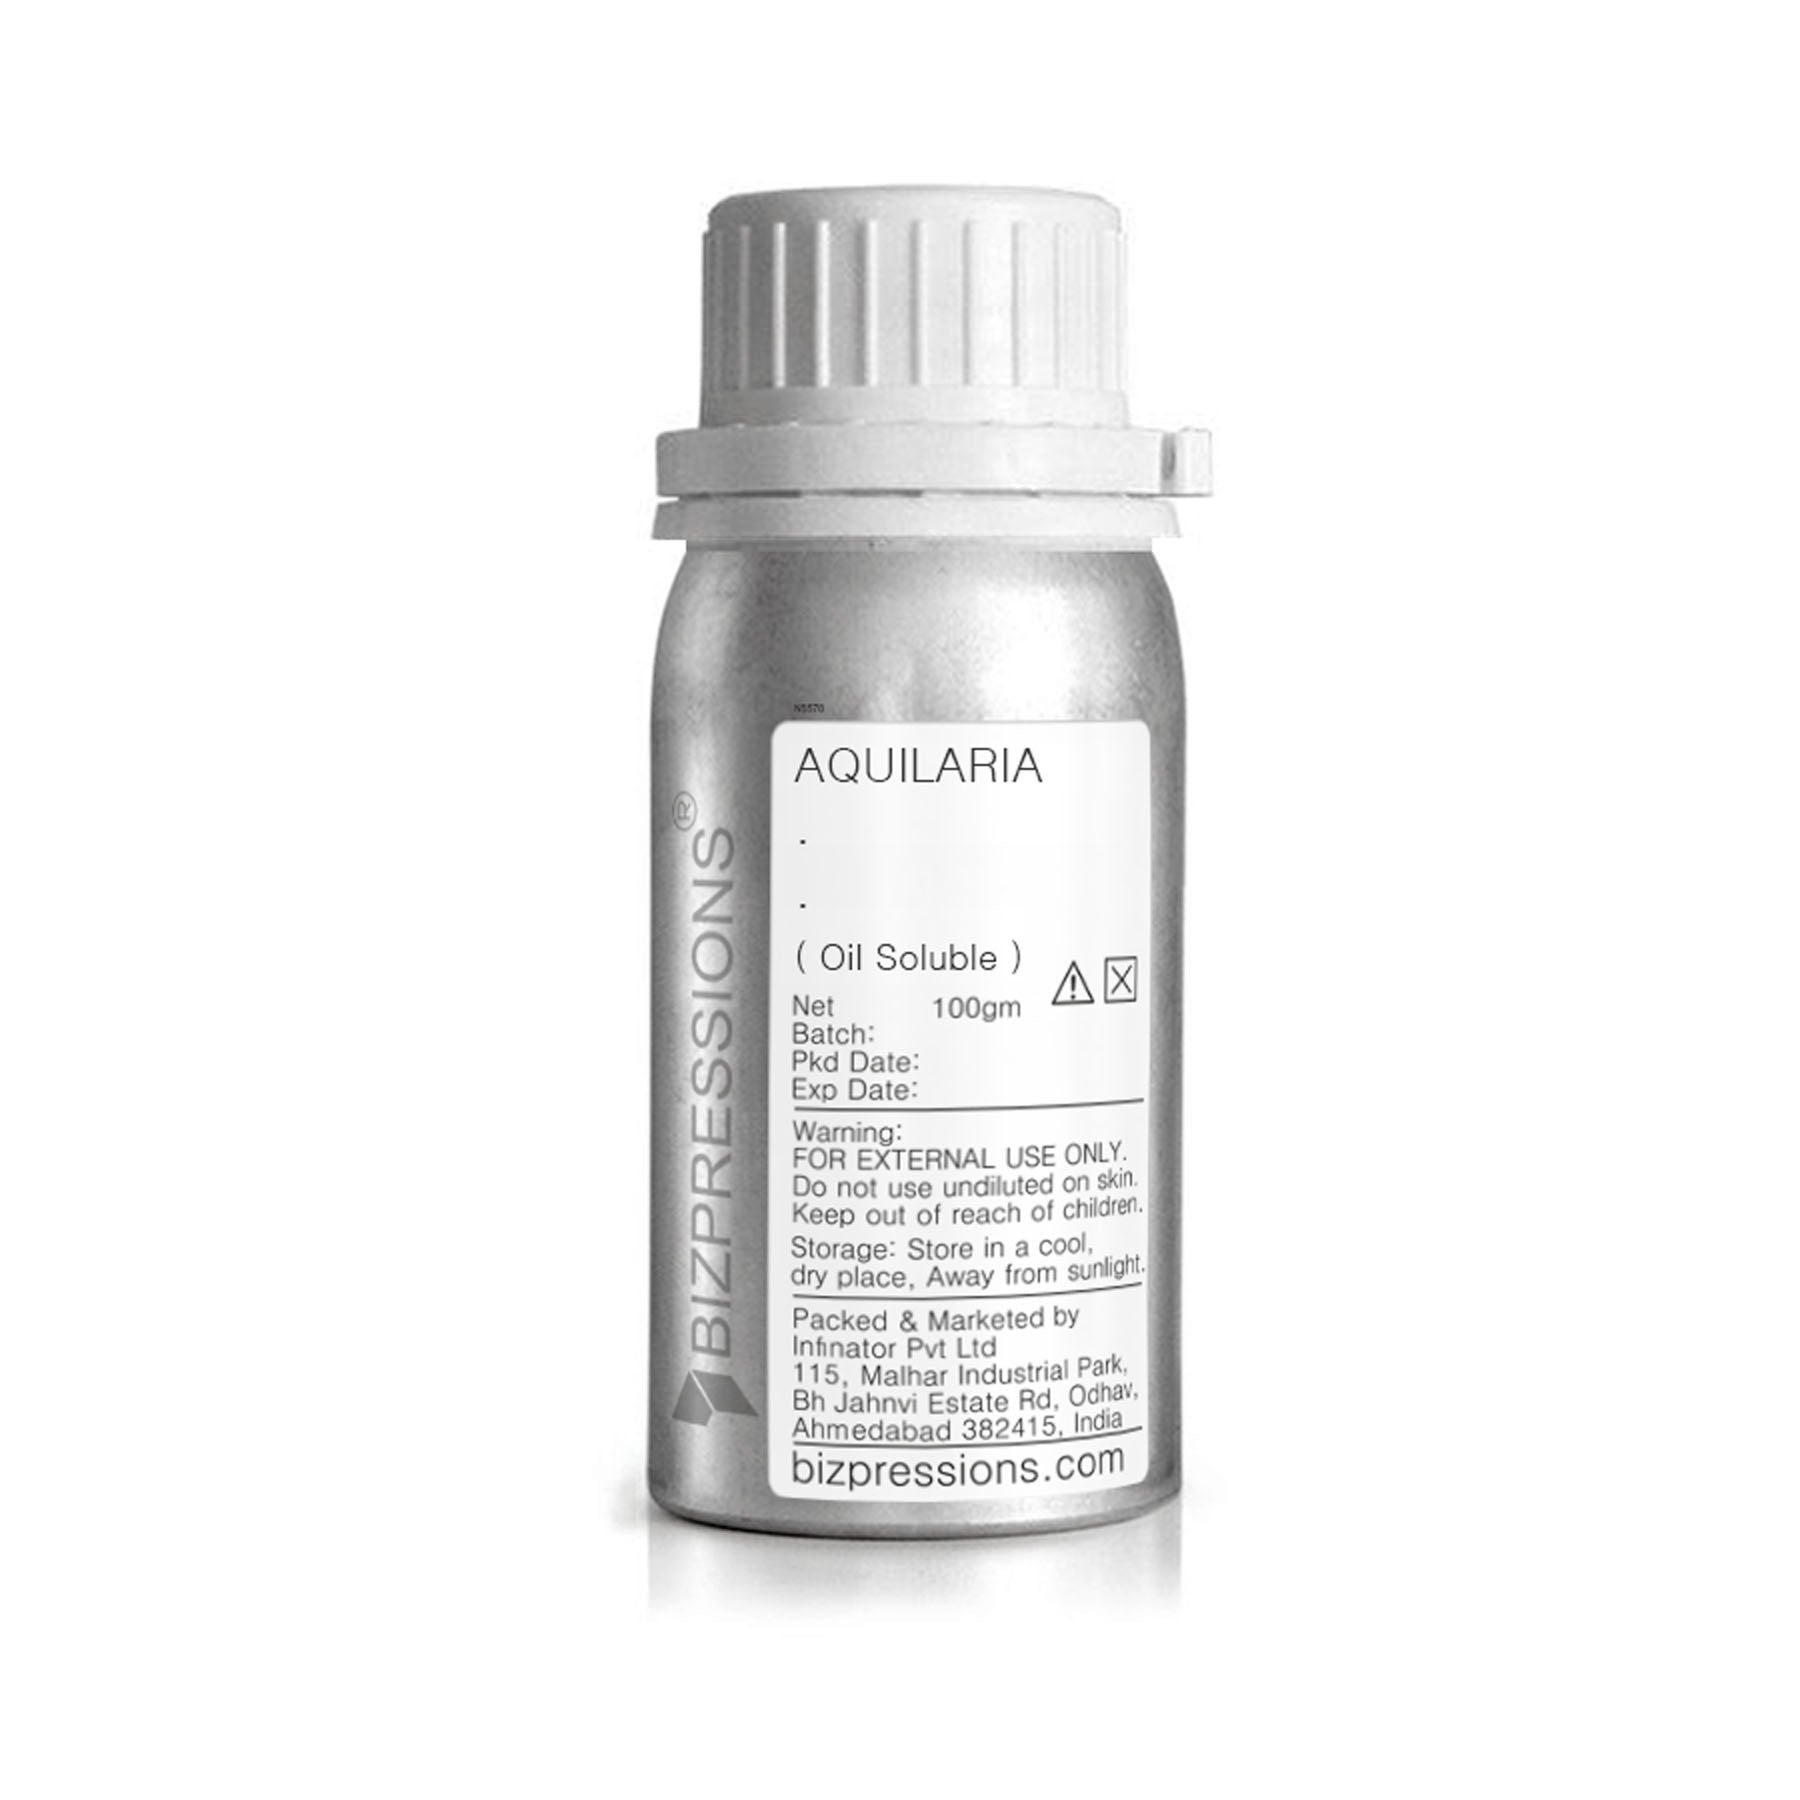 AQUILARIA - Fragrance ( Oil Soluble ) - 100 gm